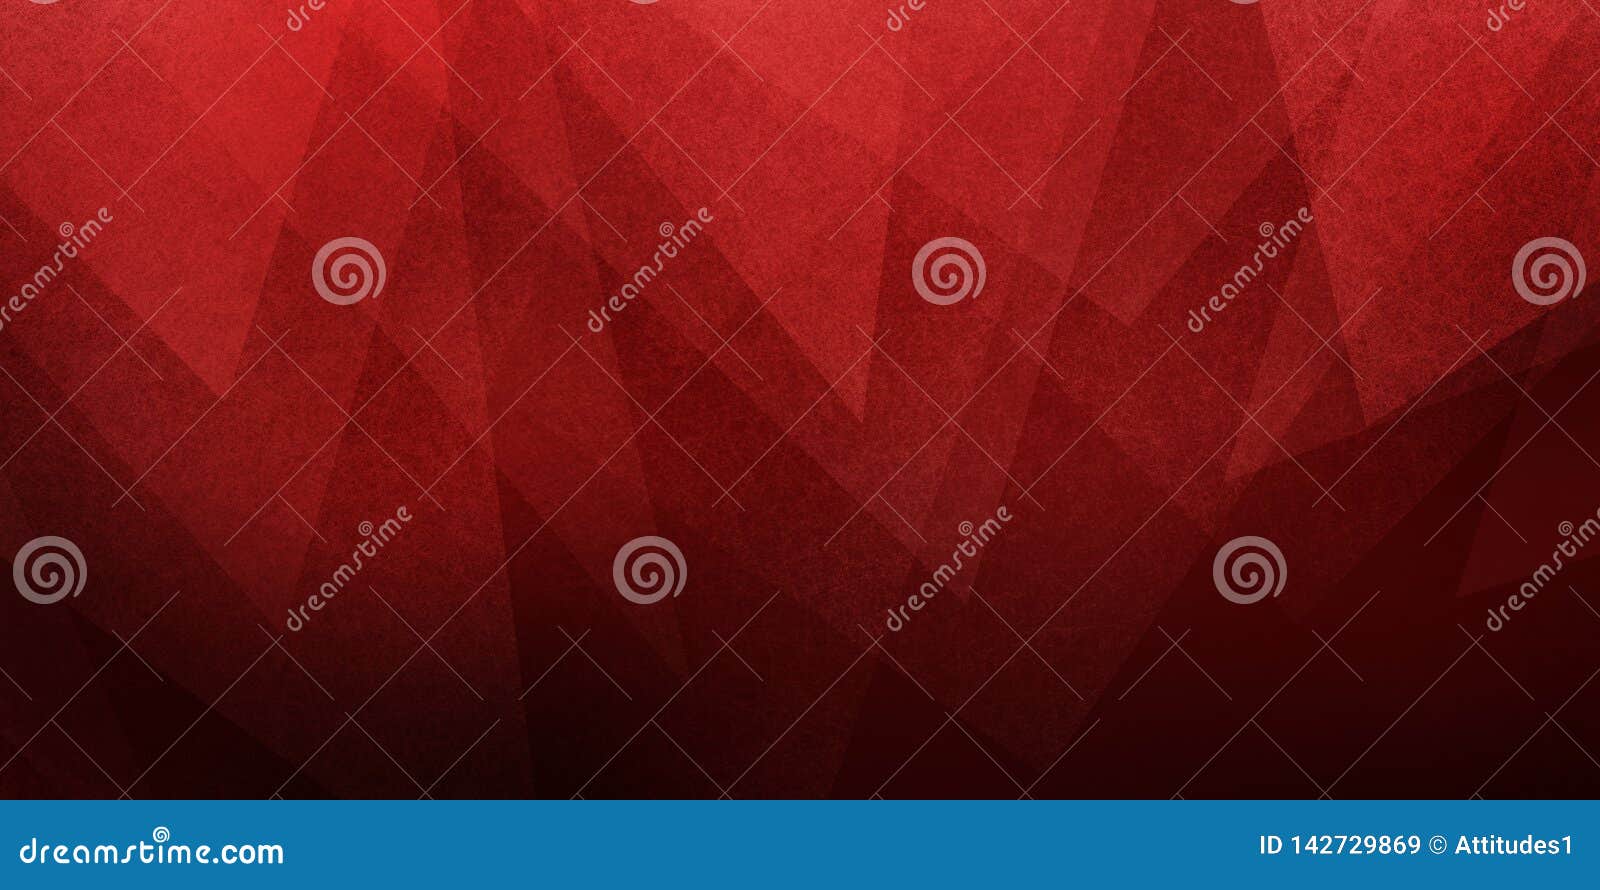 black and red abstract background with triangle layer  with texture